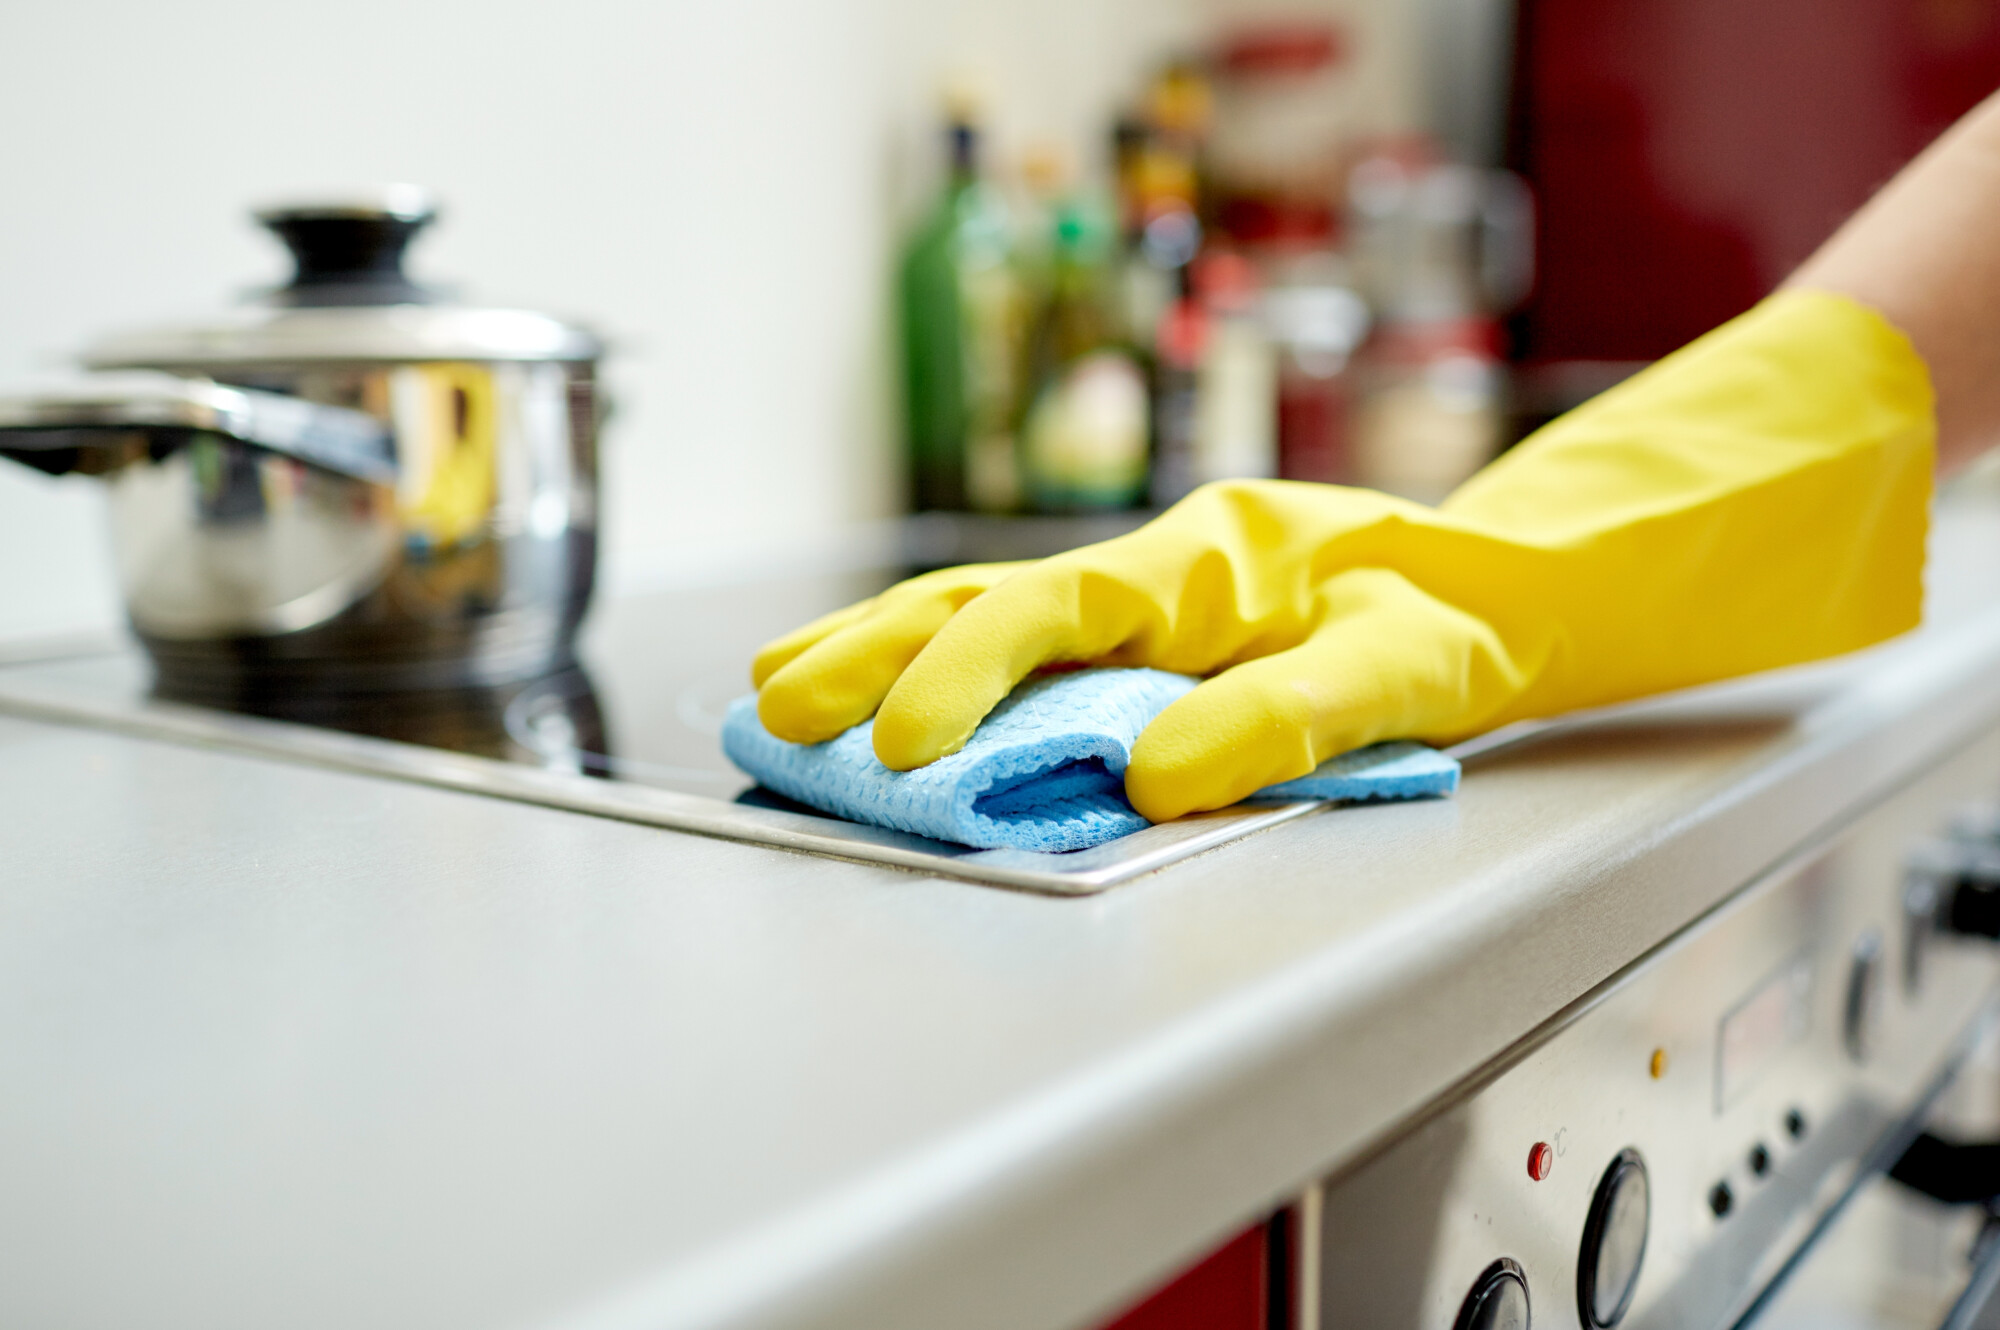 If you're operating a vacation rental business, then you know how important it is to clean after each guest leaves. Get tips to clean vacation rentals here.